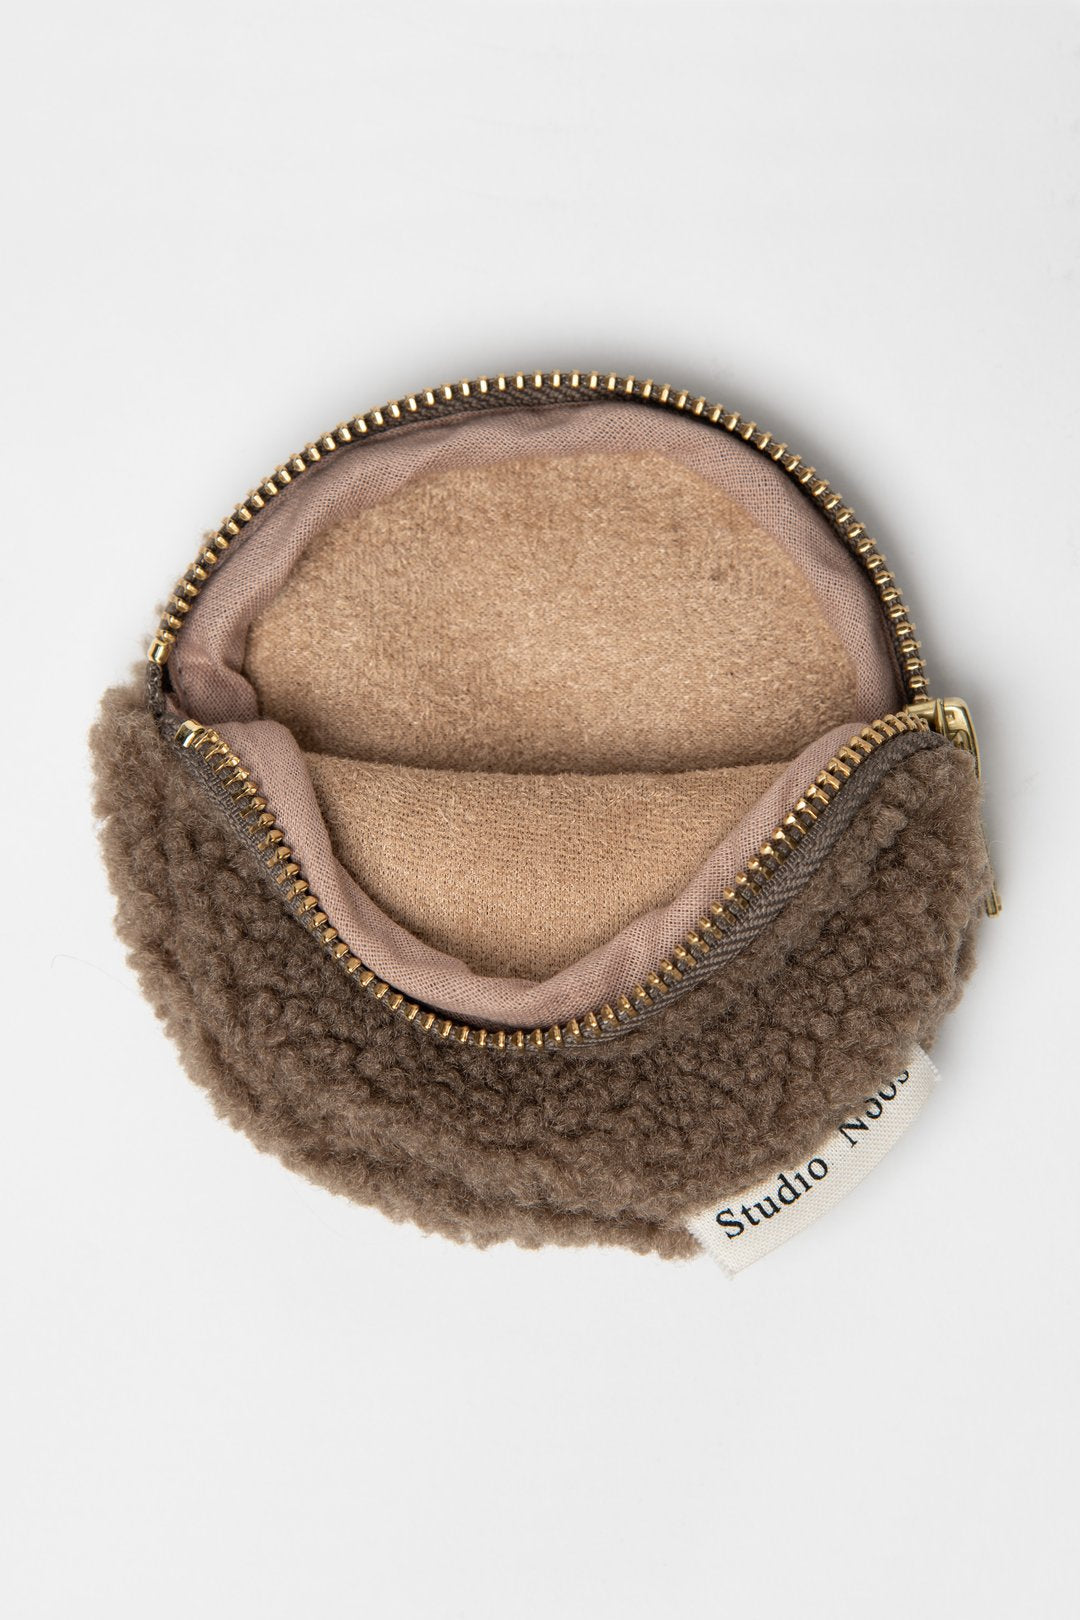 Brown round teddy wallet coin purse pouch with gold zip 